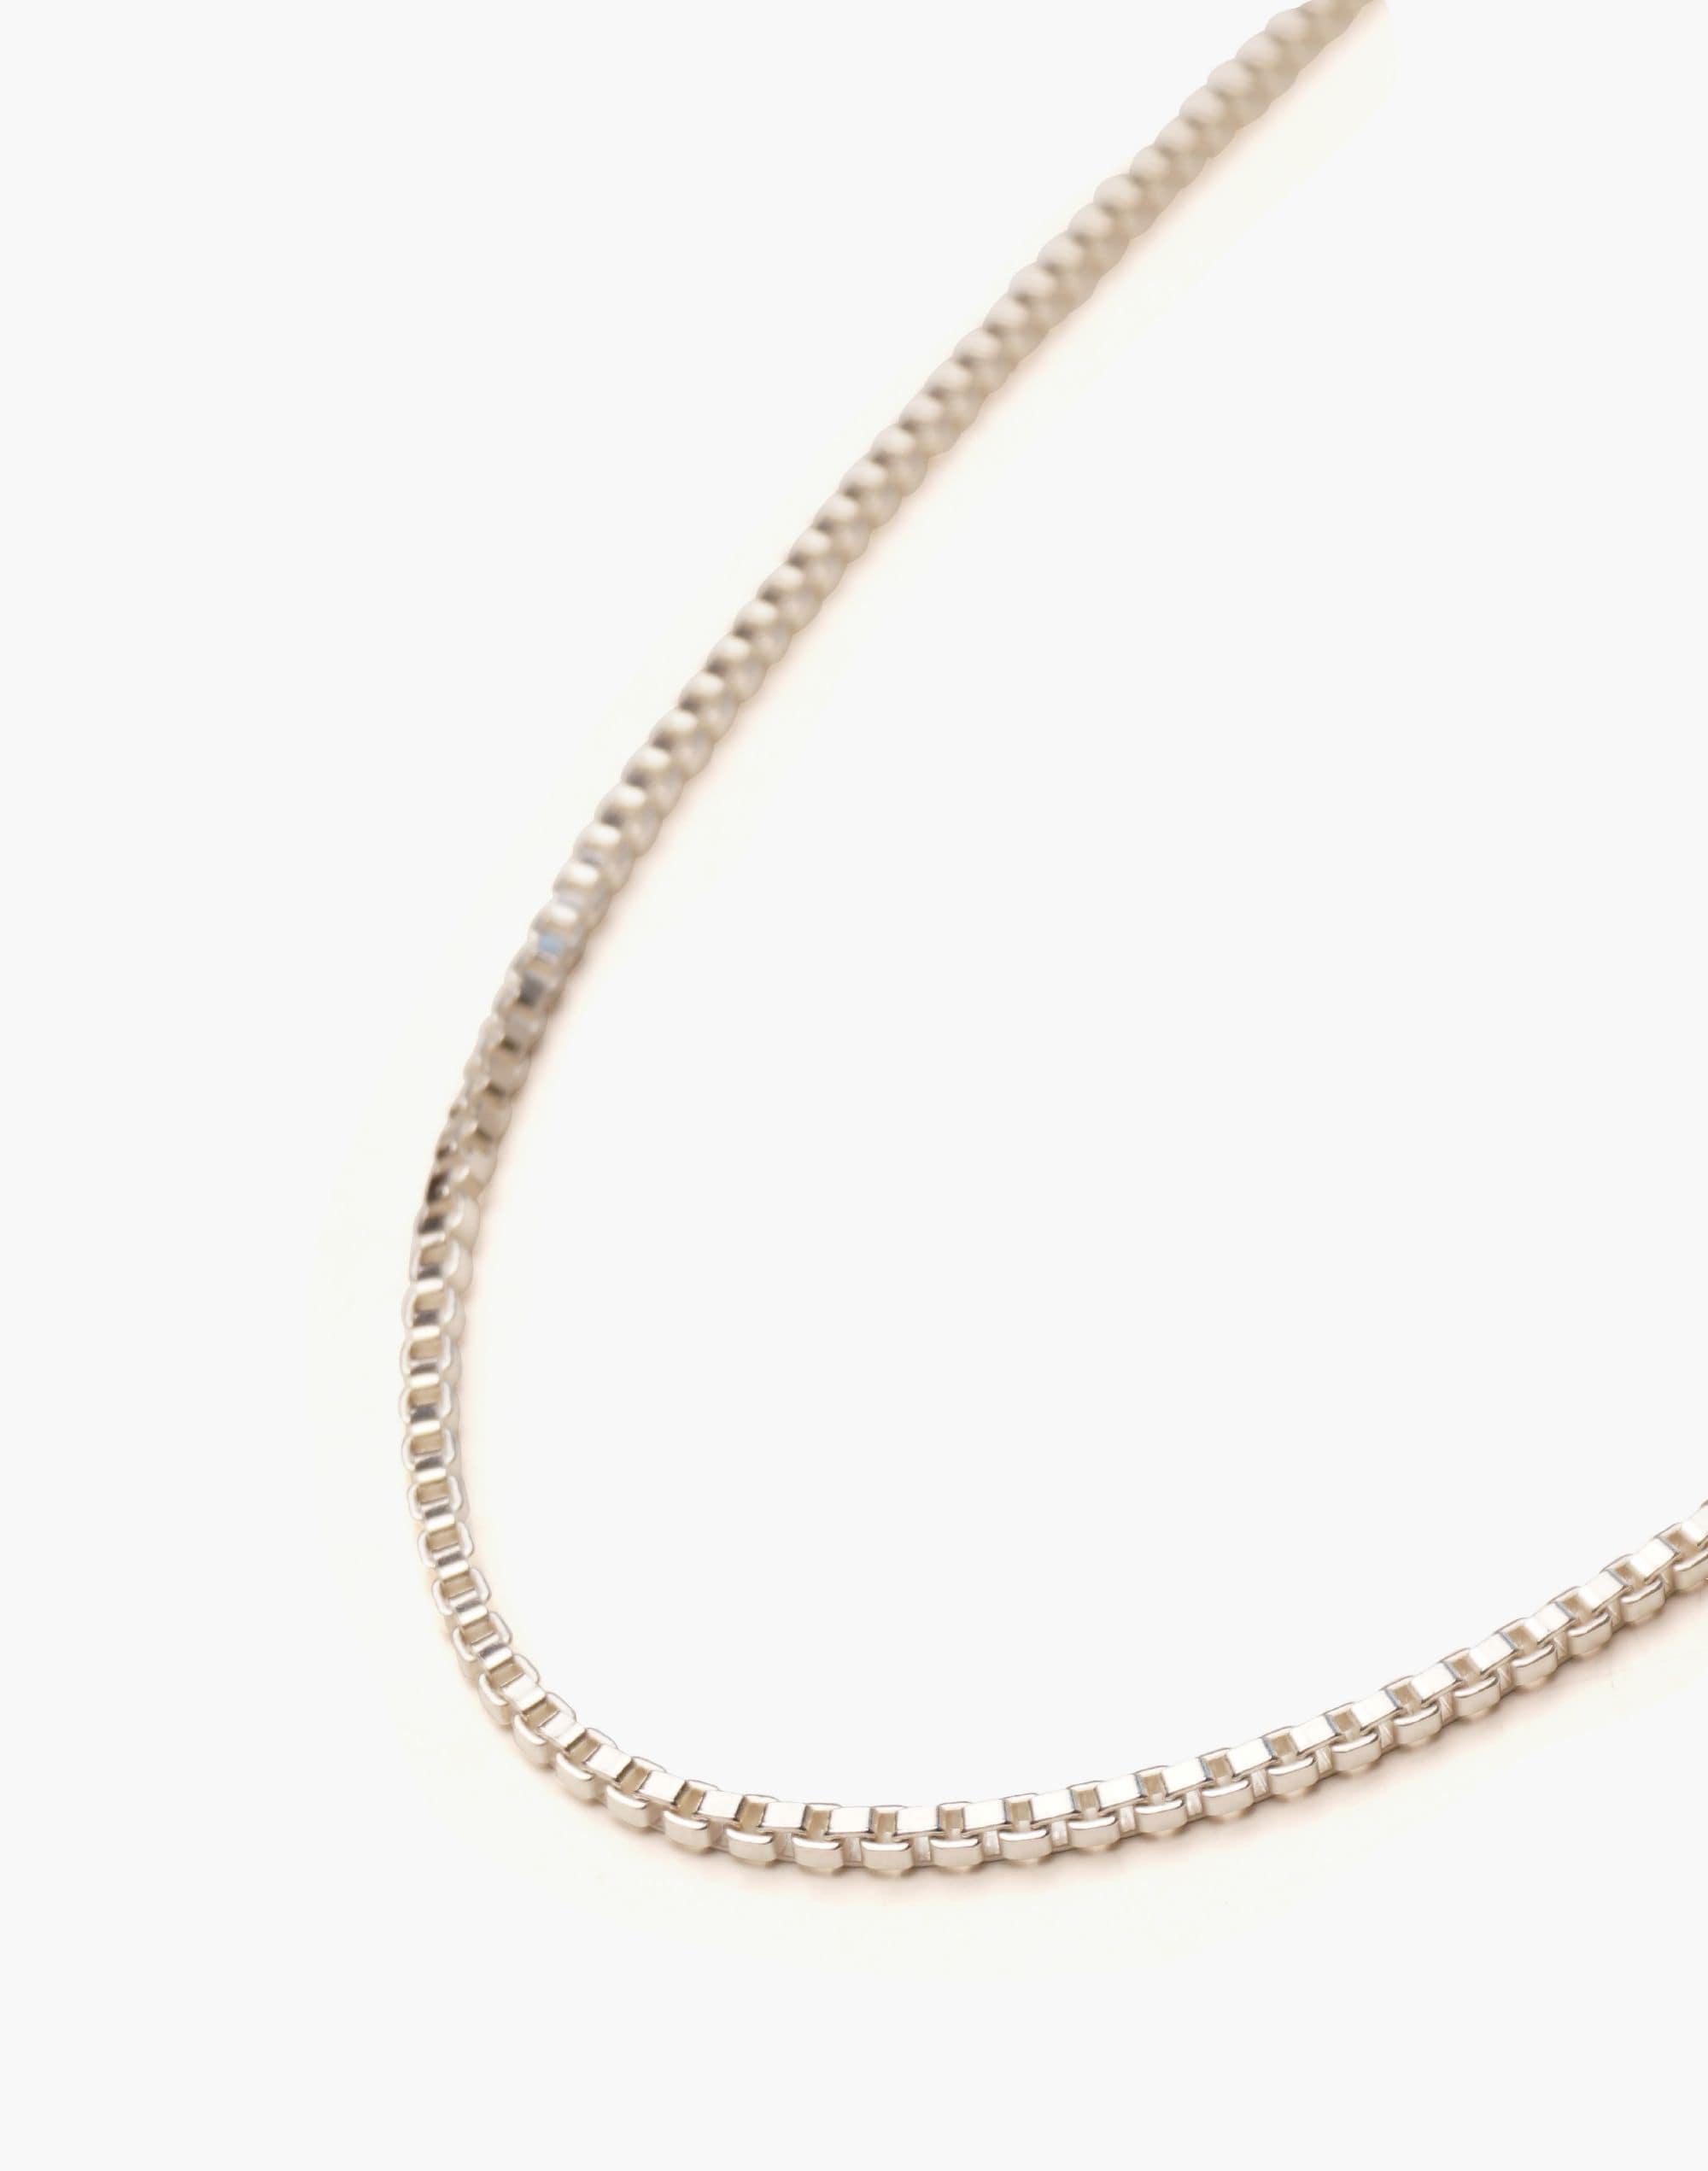 CHARLOTTE CAUWE STUDIO Box Chain Necklace in Sterling Silver